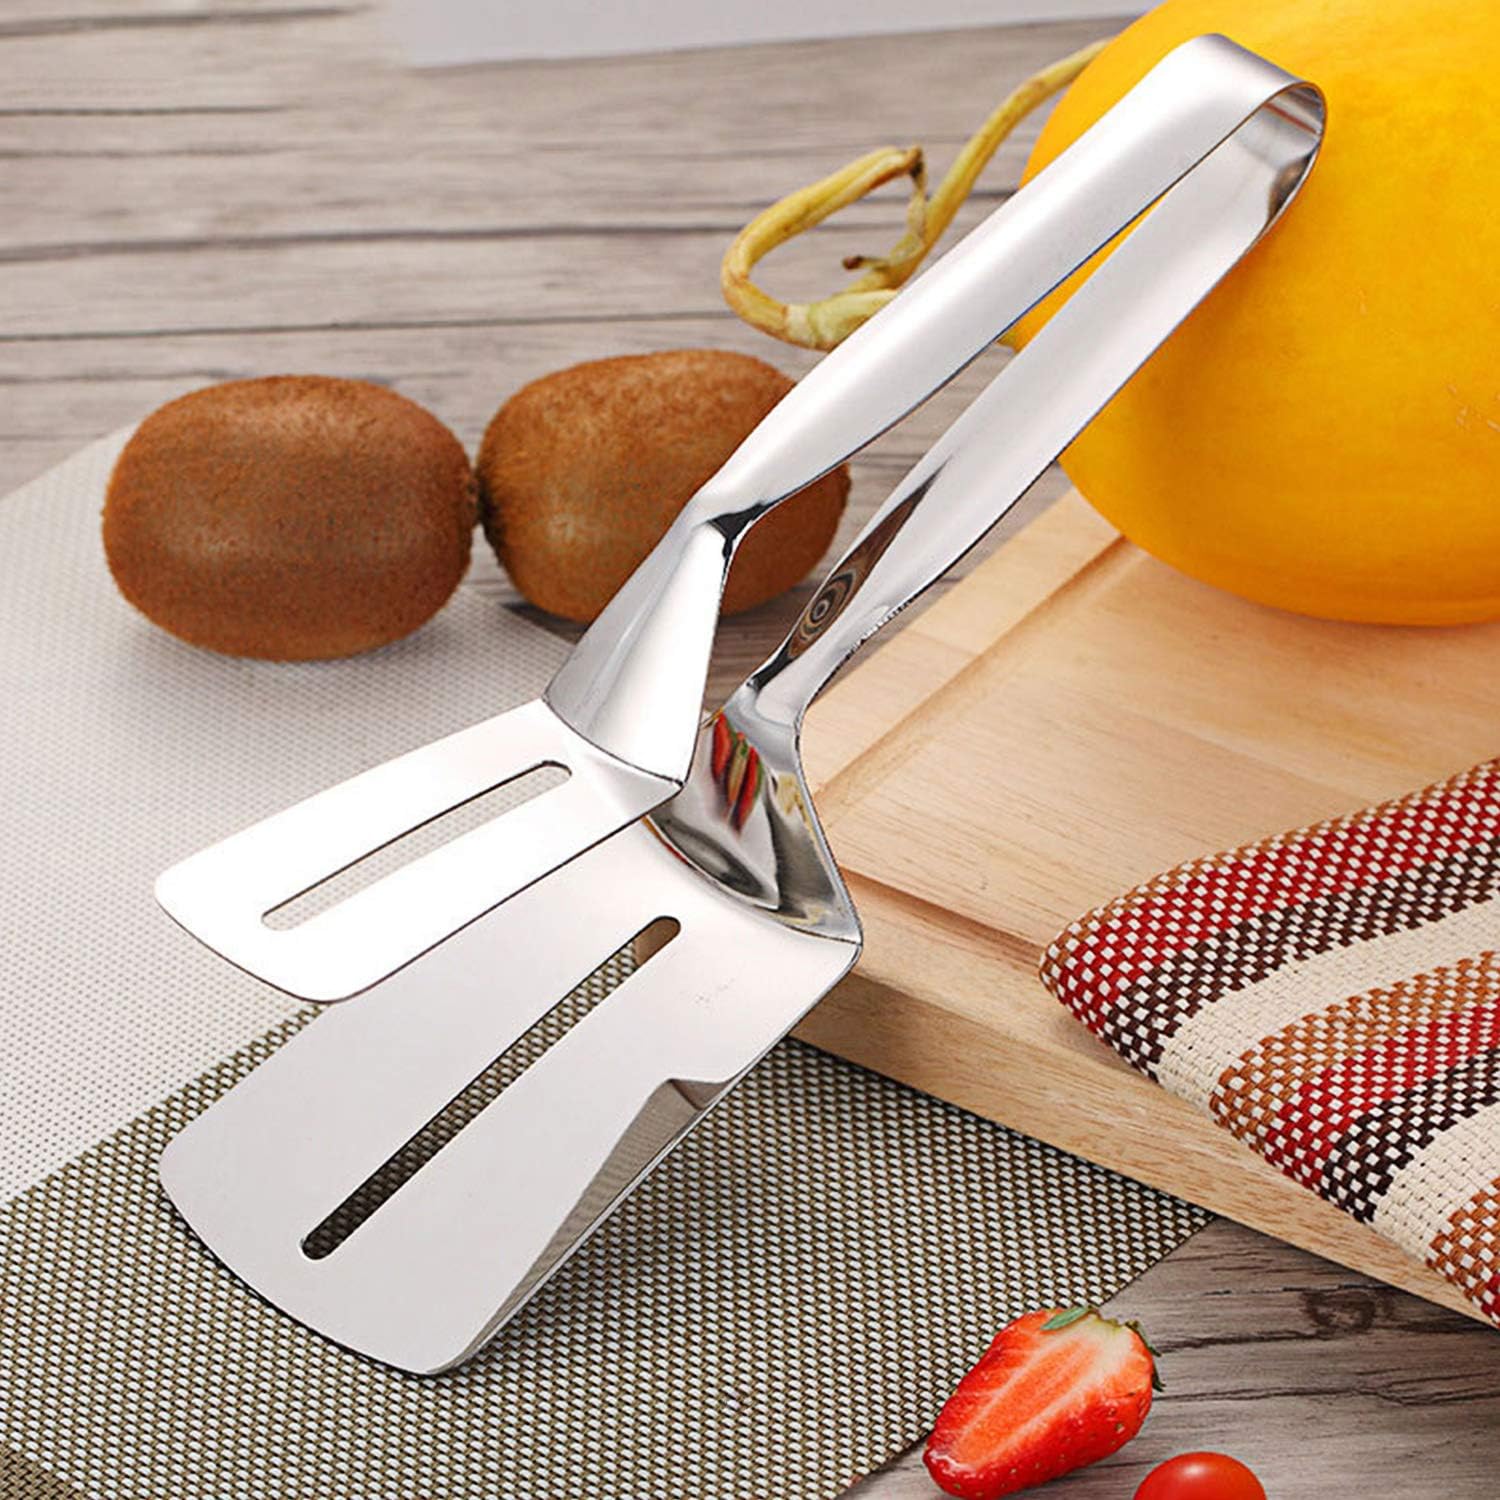 Stainless Steel Food Tongs Barbeque Clamps Kitchen Clamps - Snapzer™️ Stainless Steel Barbecue Clamp Zaavio®️